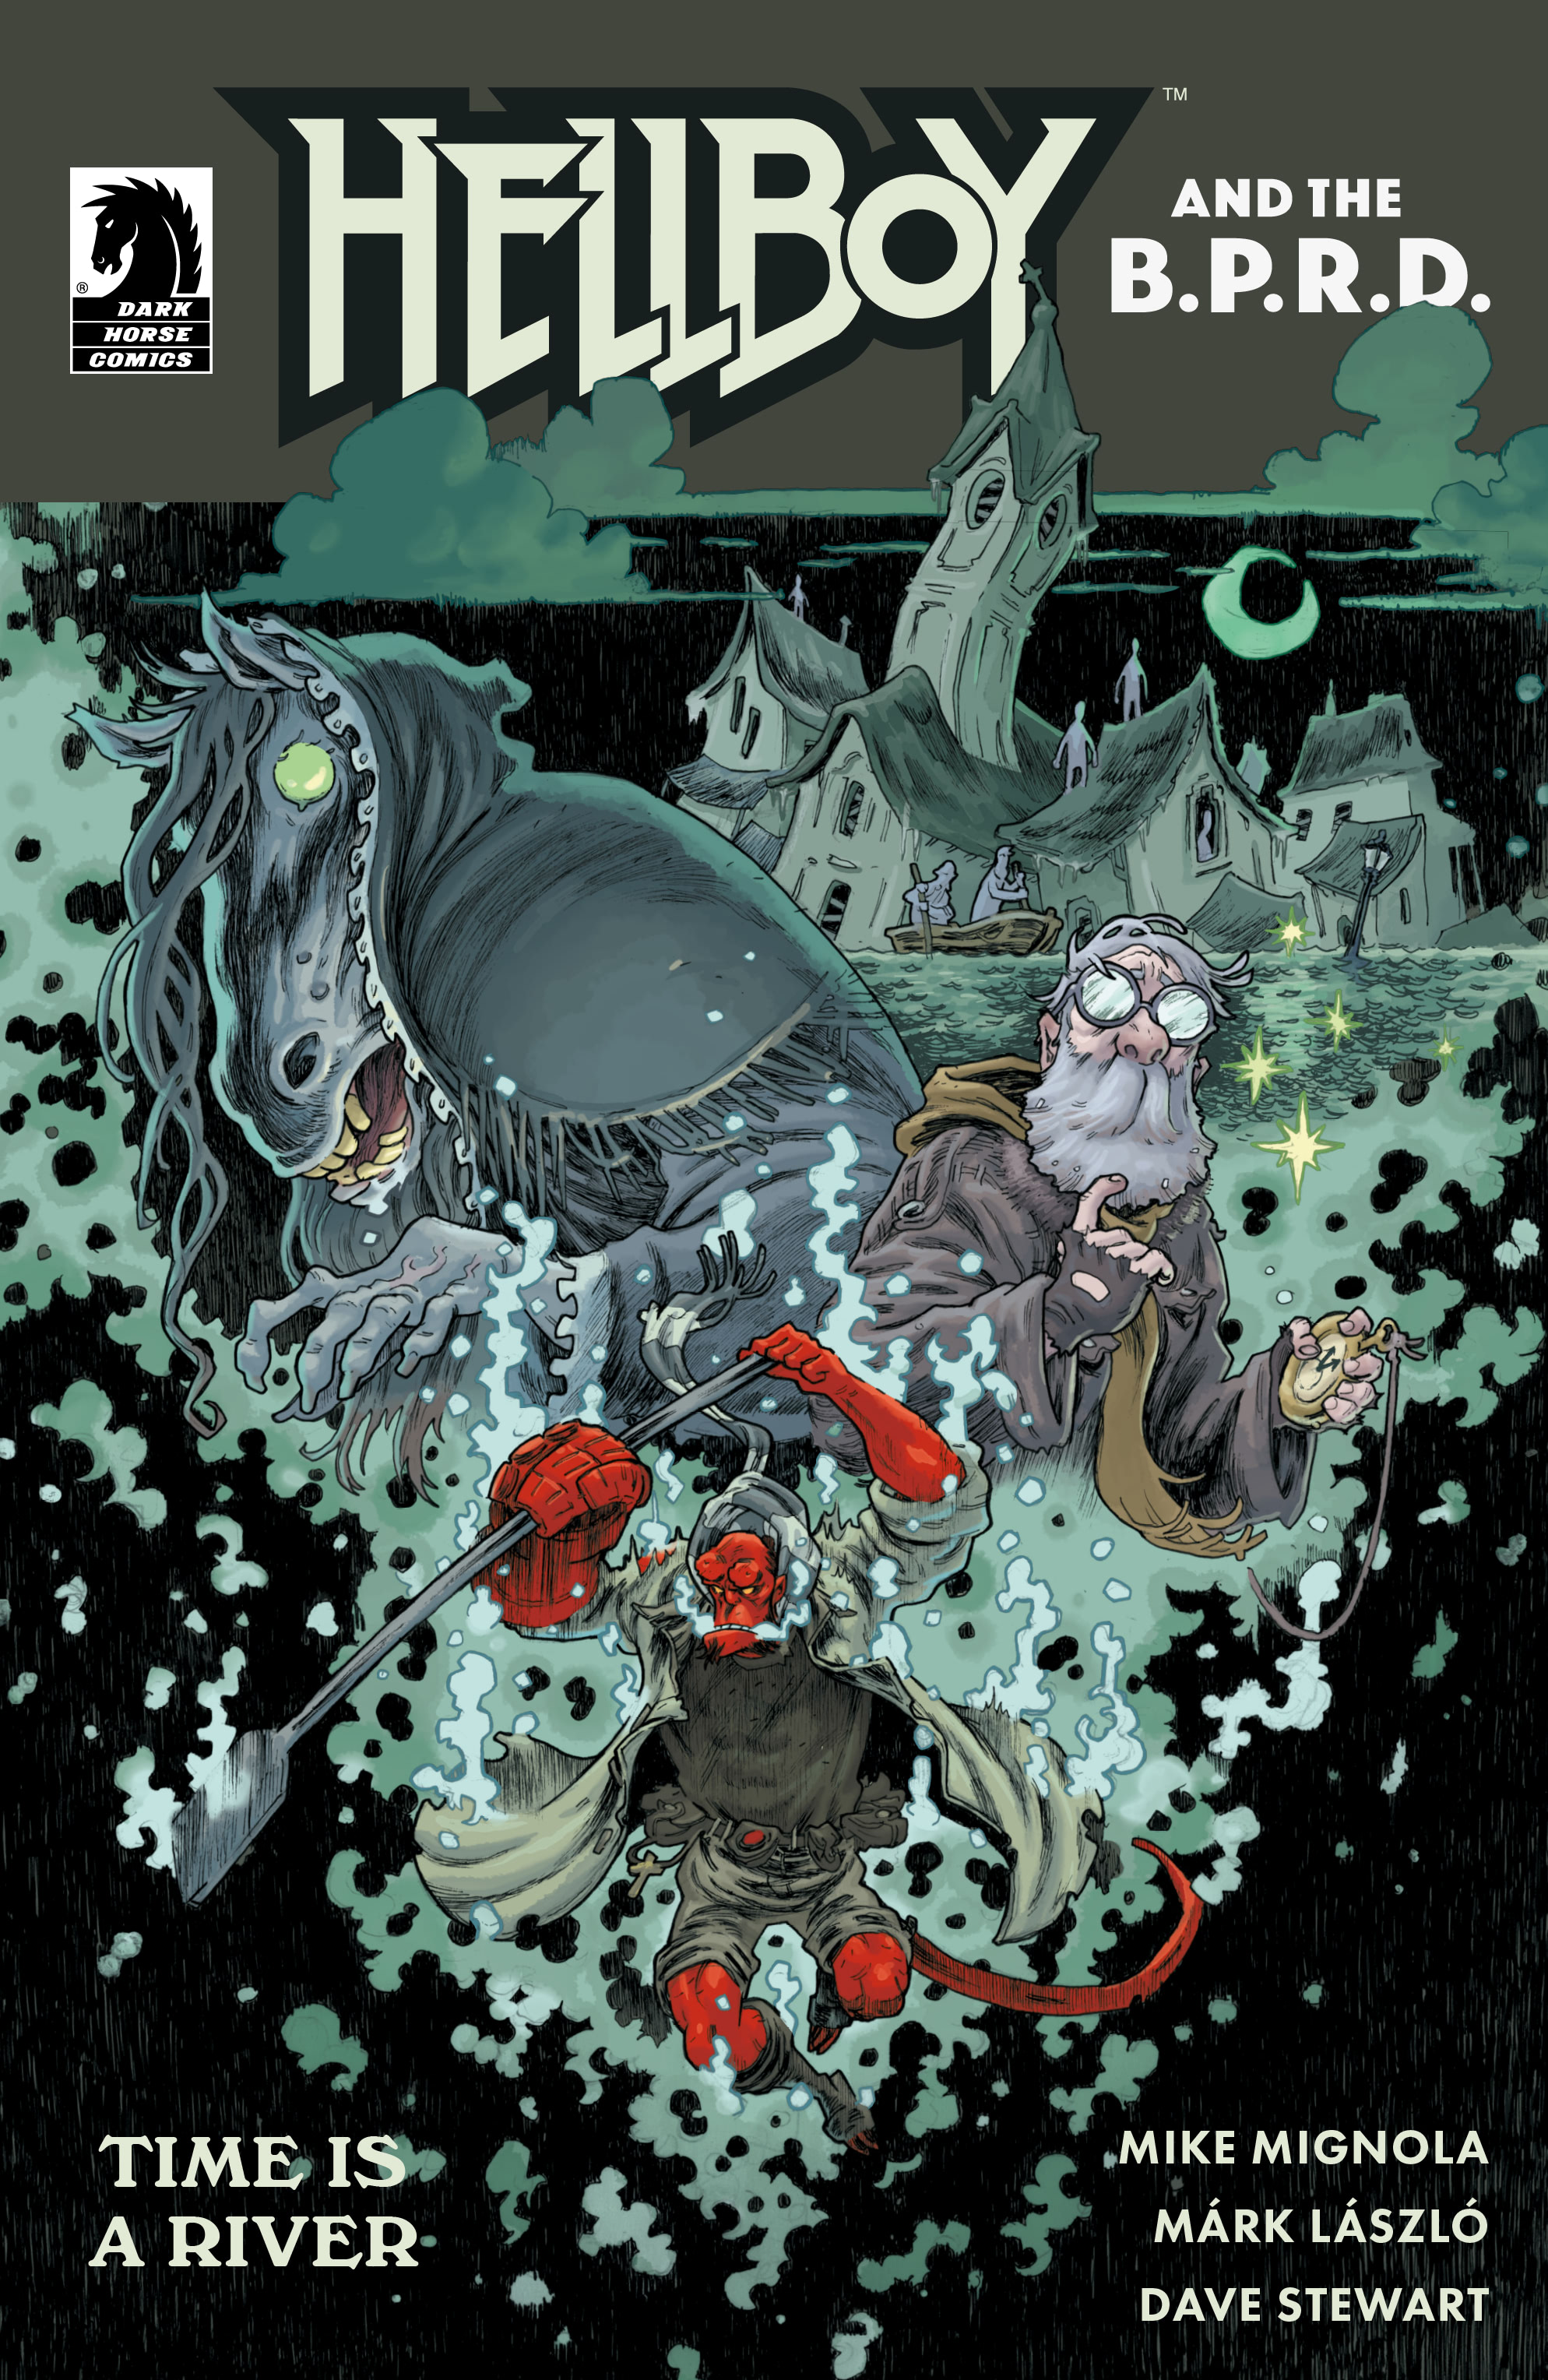 Read online Hellboy and the B.P.R.D.: Time is a River comic -  Issue # Full - 1